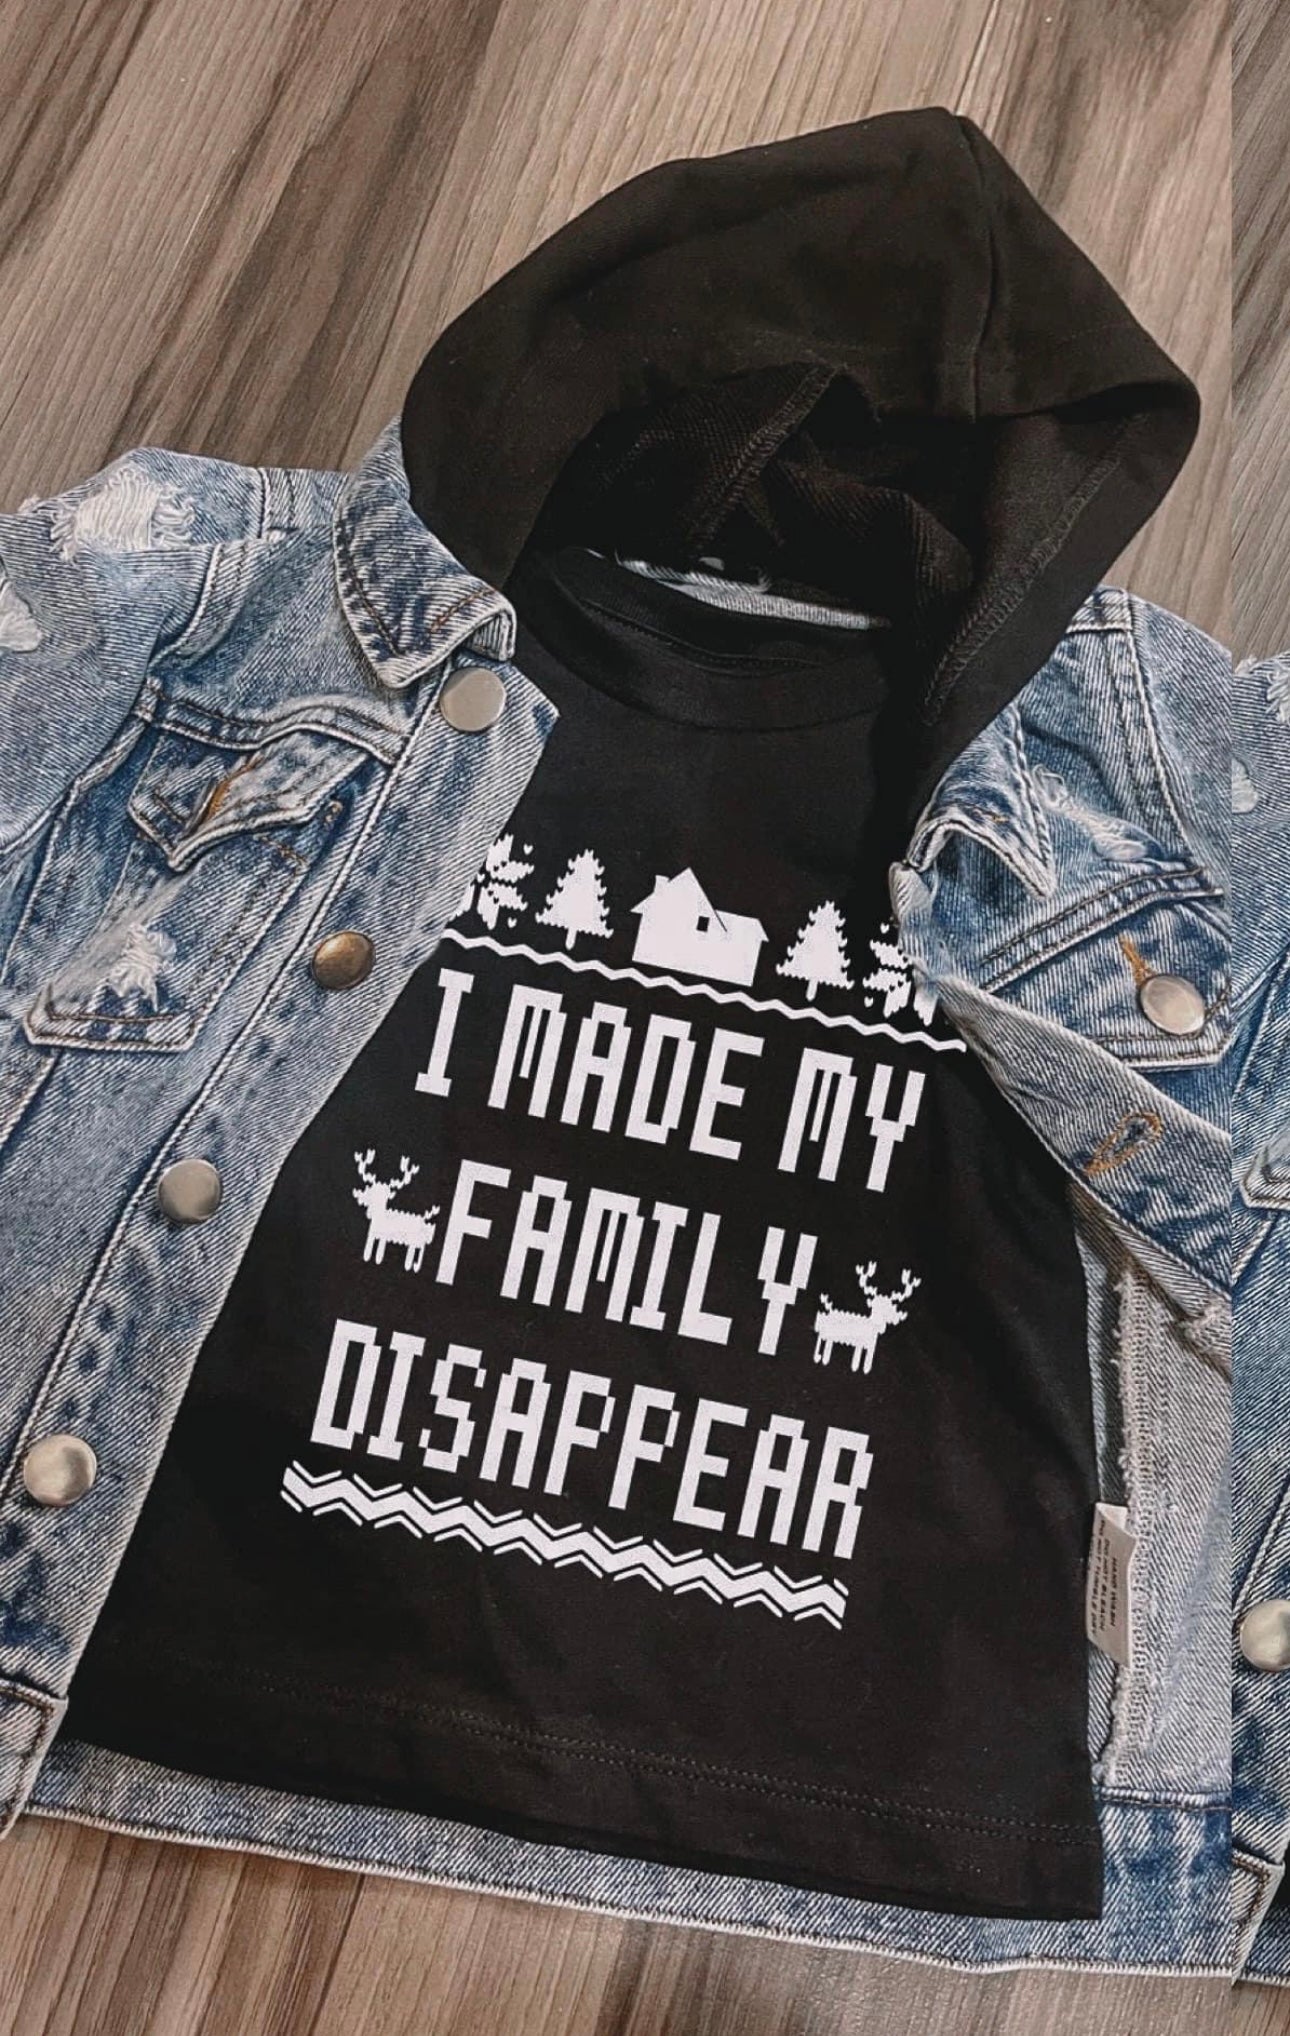 I made my family disappear tee